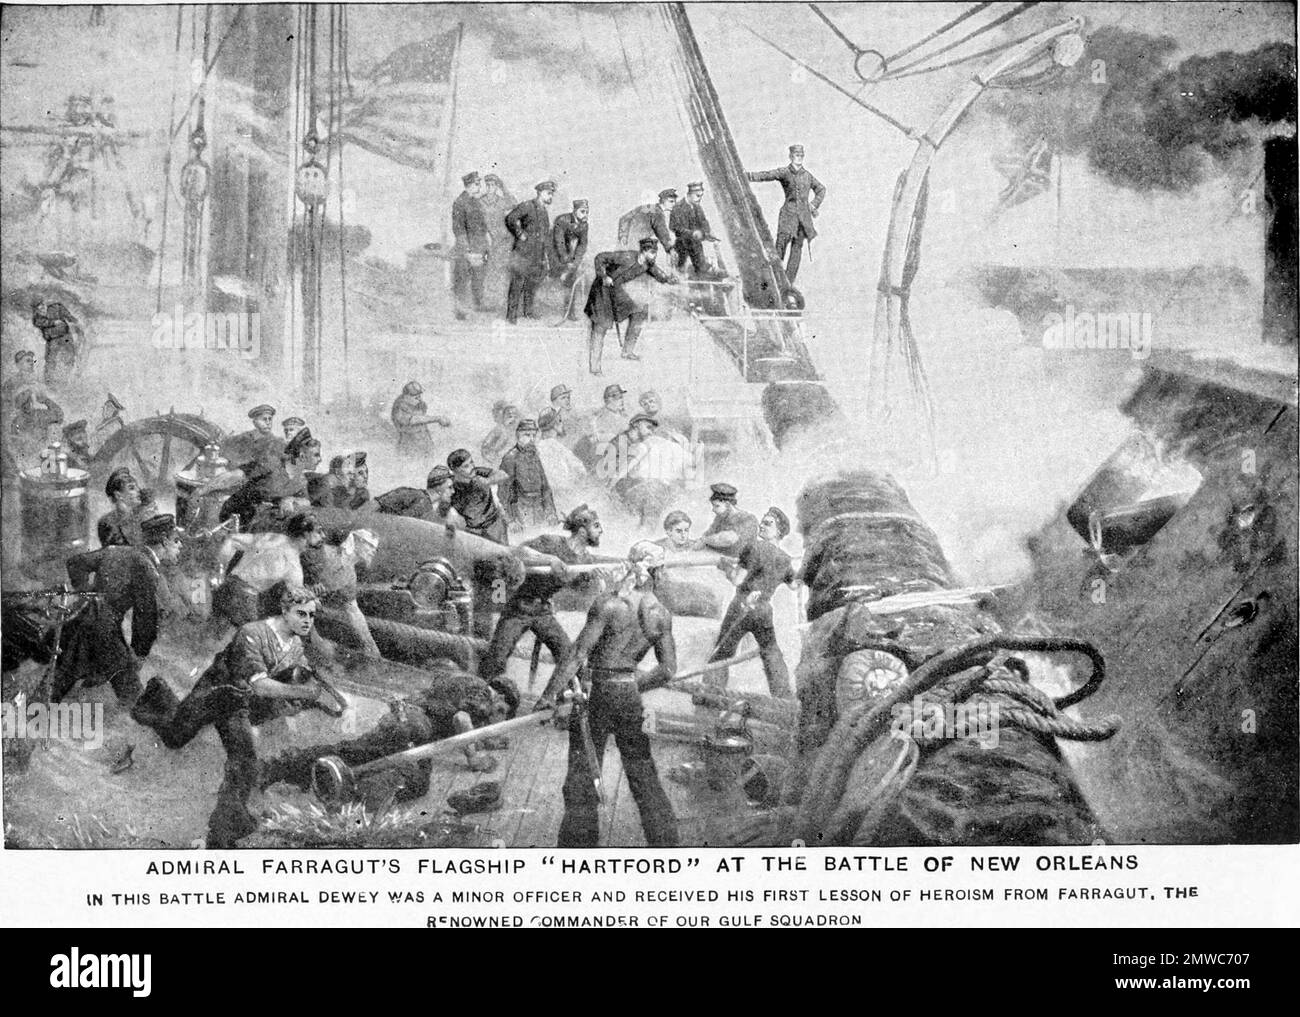 The Battle of Forts Jackson and St. Philip (April 18–28, 1862) was the decisive battle for possession of New Orleans in the American Civil War. The two Confederate forts on the Mississippi River south of the city were attacked by a Union Navy fleet. The bombardment of hte forts was largely ineffective but the passing of Unionist fleet during the night of 24th April 1862 resulted in a battle in which the Confederate fleet was destroyed, and New Orleans fell with no futher fighting. This image depicts the fighting on board Admiral Farragut's flagship Hartford in its close fight with the Confeder Stock Photo